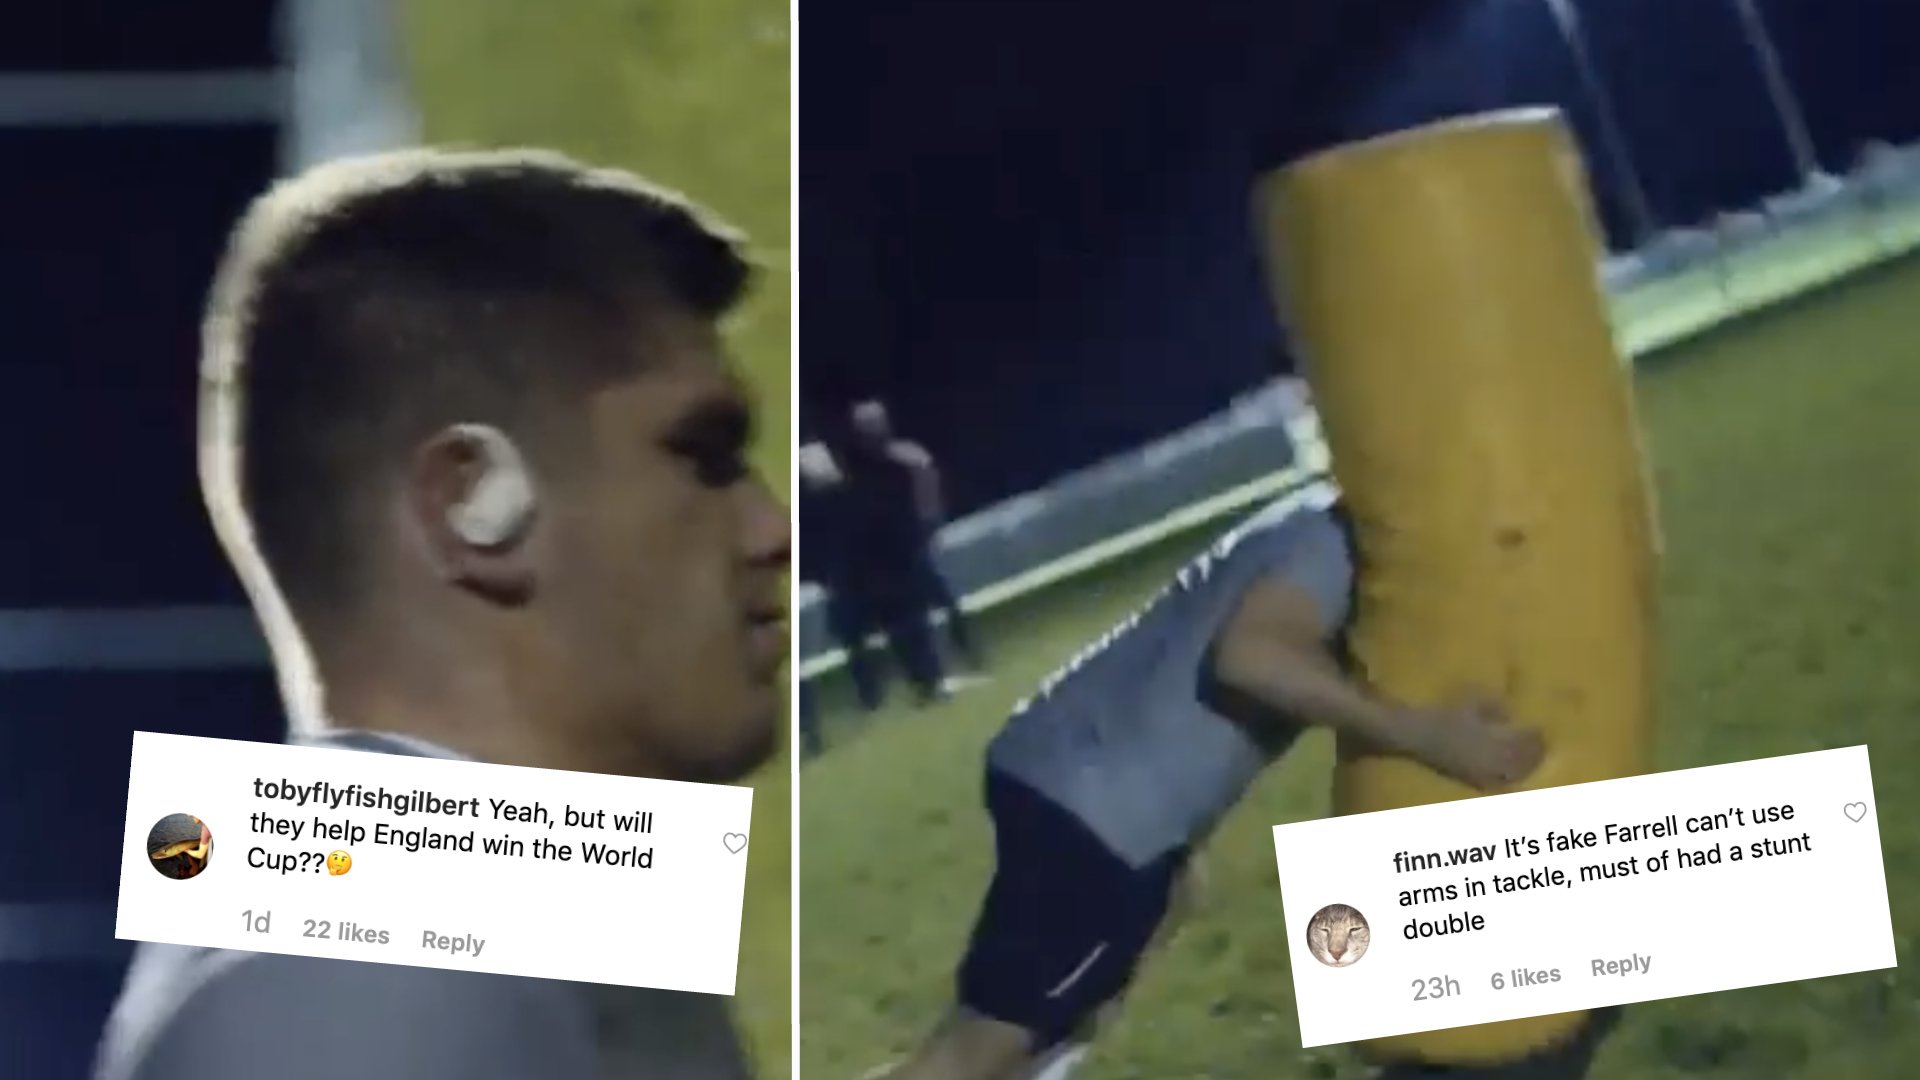 WATCH: Owen Farrell features in the new Beats by Dre advert - The comments about him are hilarious